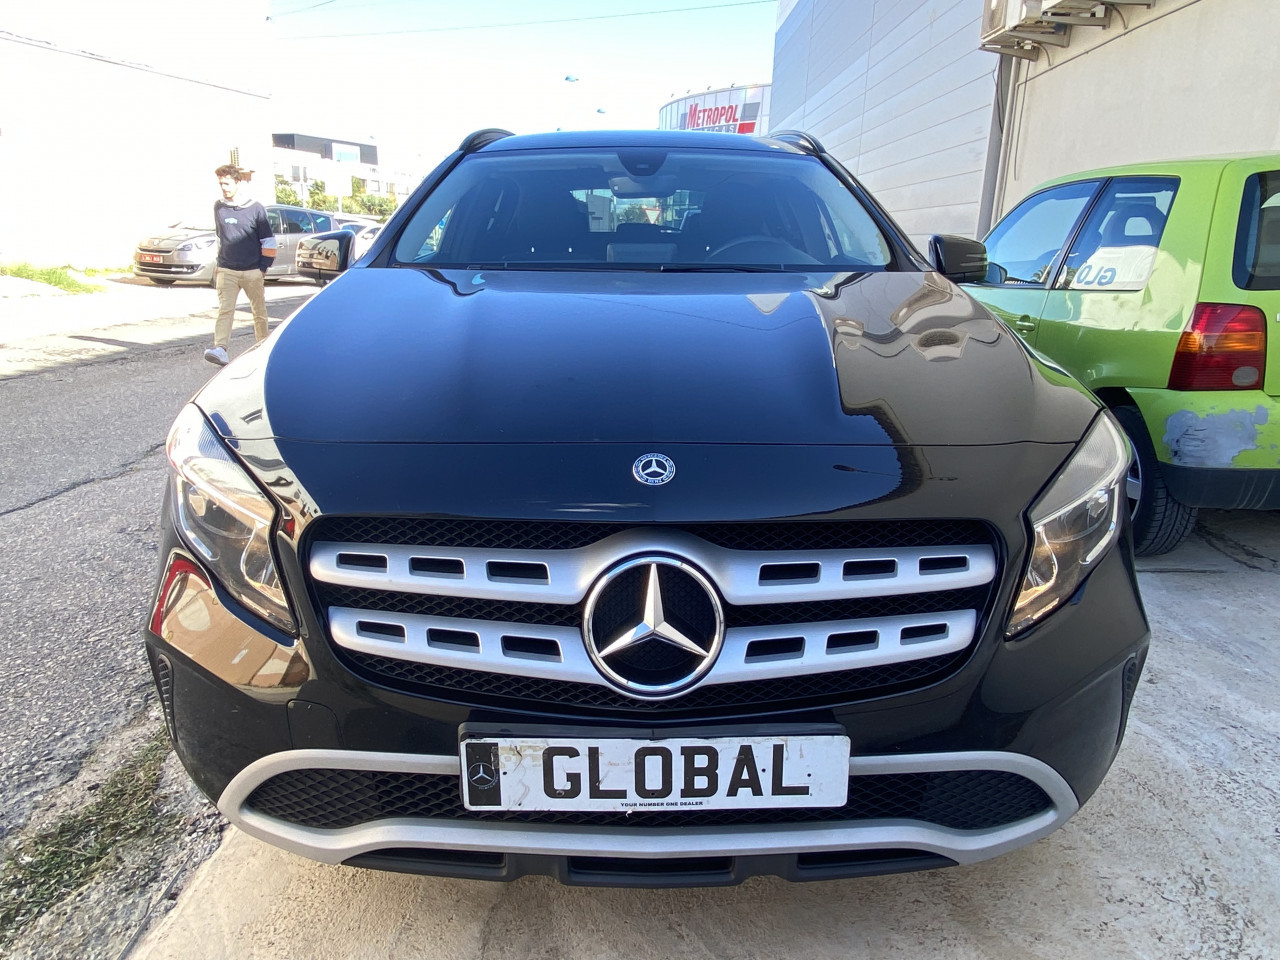 Mercedes-Benz Gla 180D Style 7 Gear Tronic Automatic